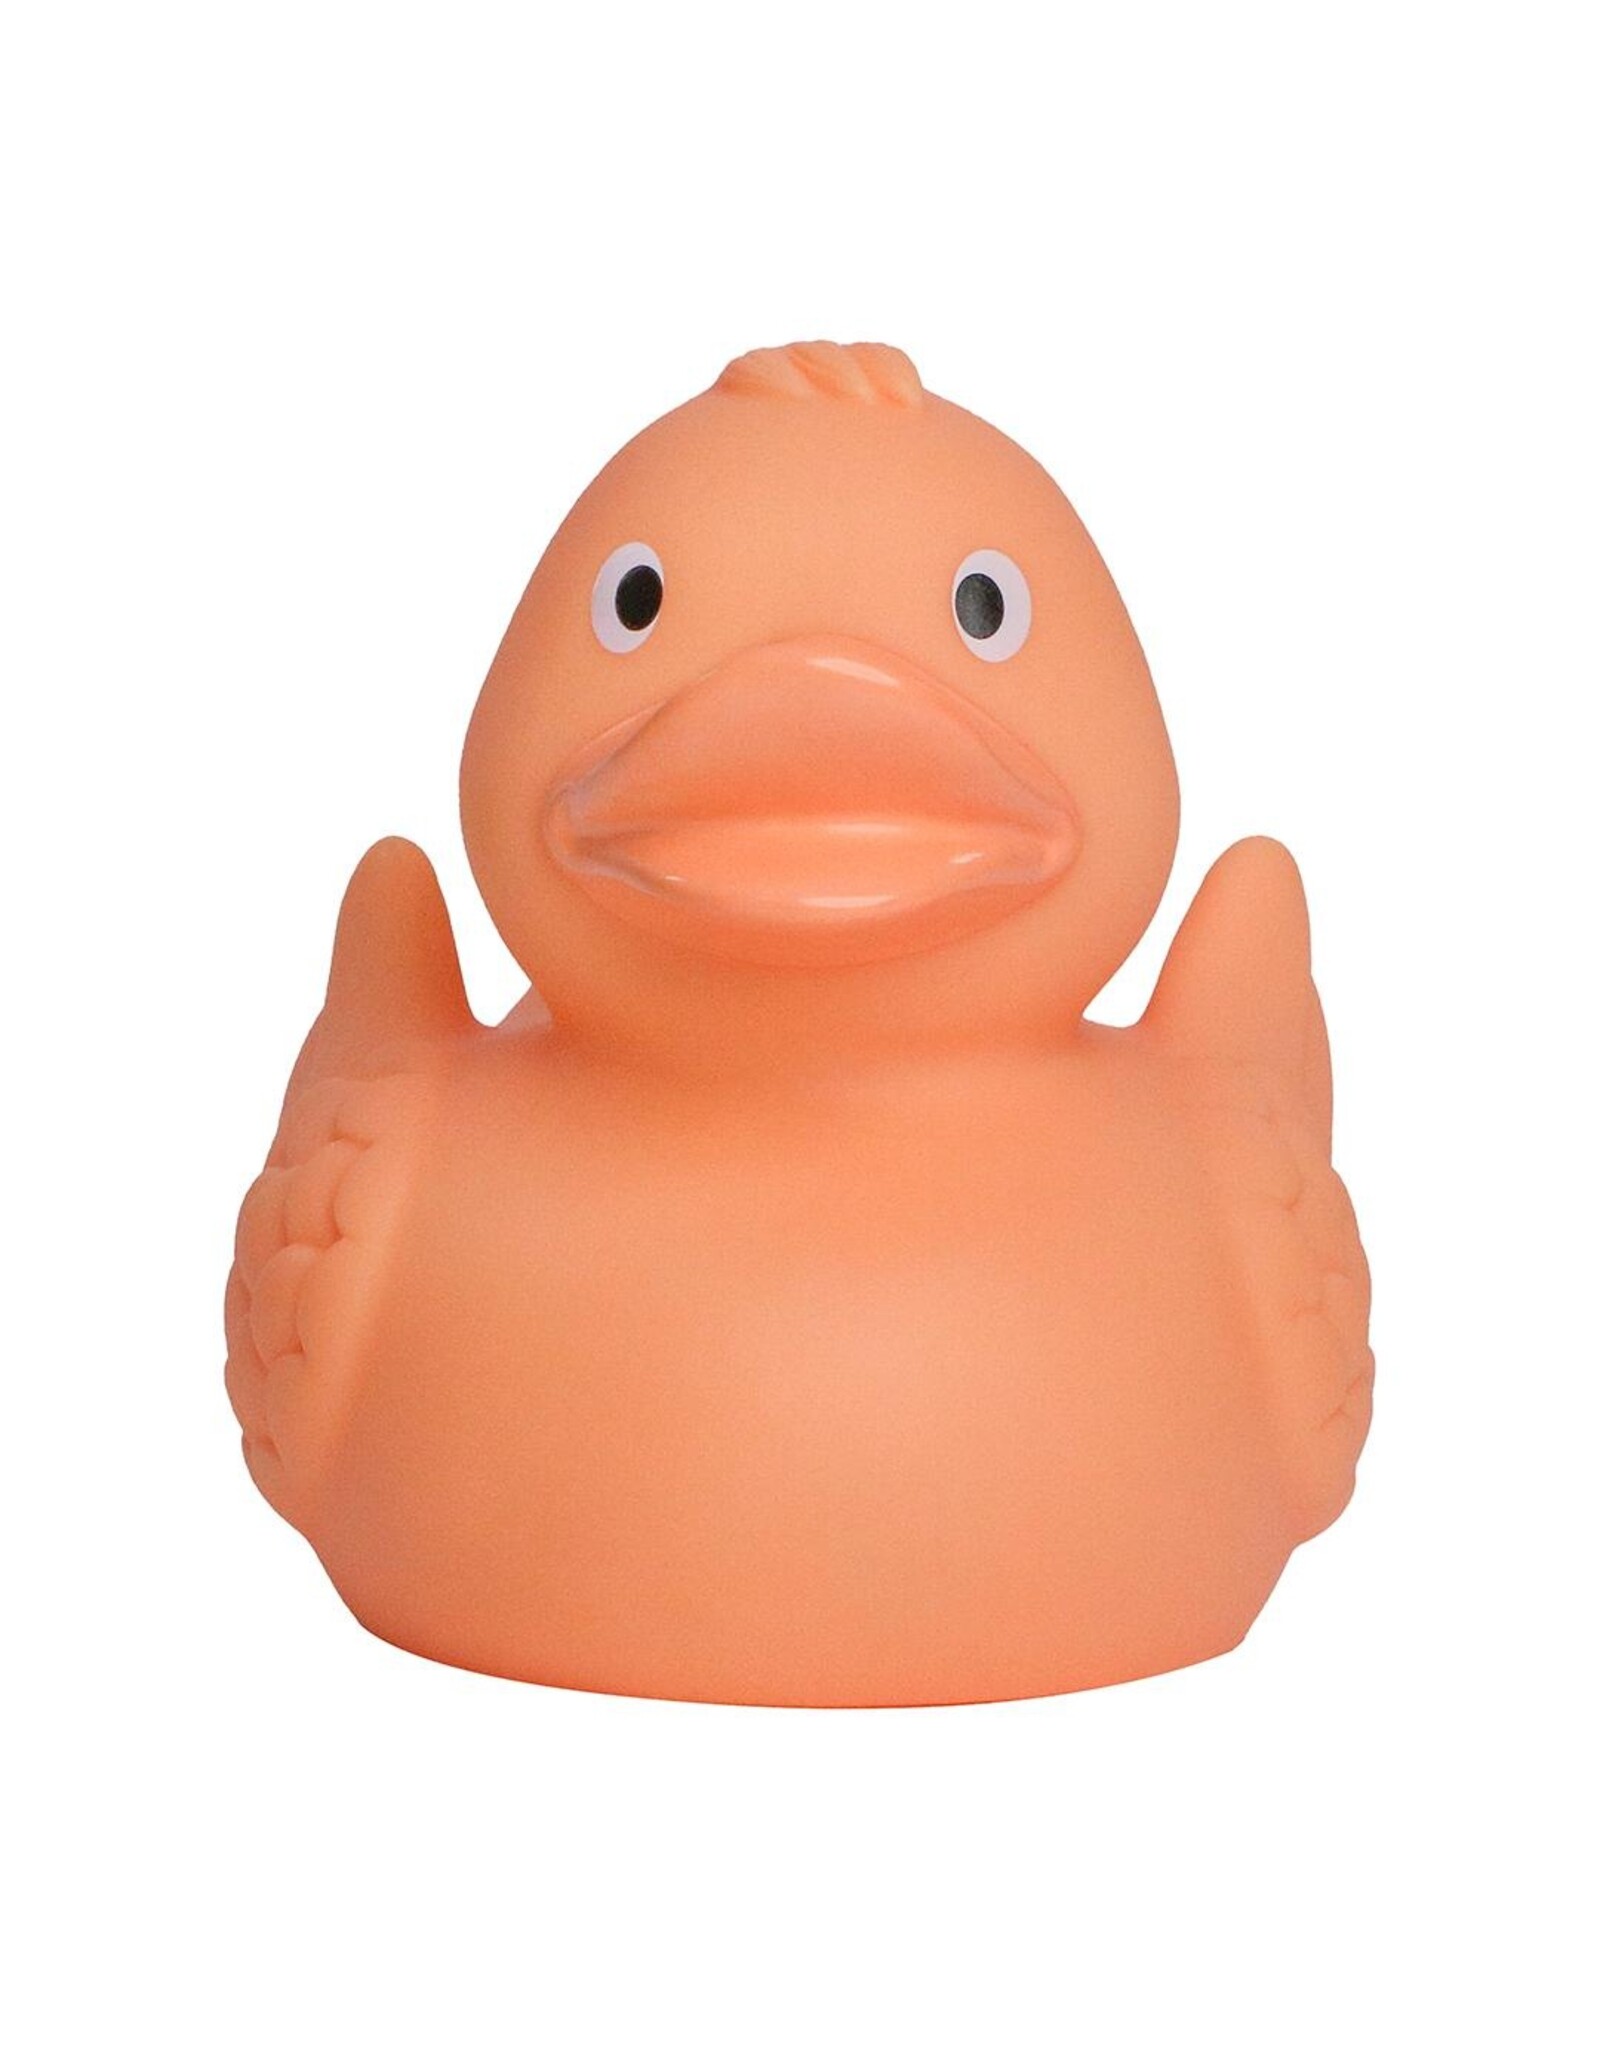 Pastel Orange Rubber Duck with Wings